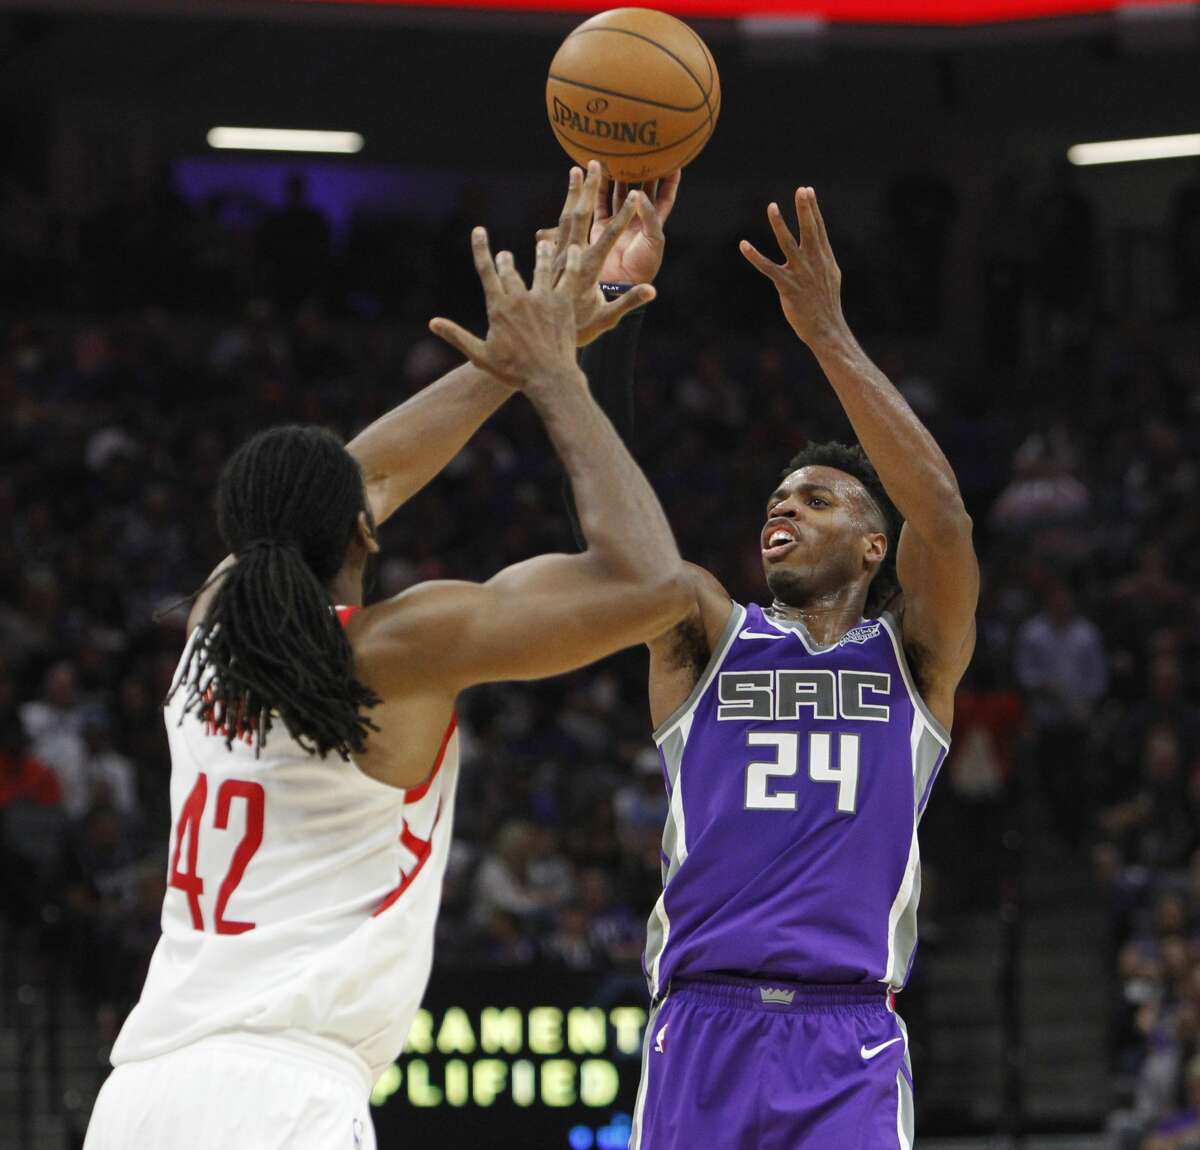 Sacramento Kings guard Buddy Hield (24) shoots over Houston Rockets defender Nene (42) during the second half of an NBA basketball game in Sacramento, Calif., Wednesday, Oct. 18, 2017. The Rockets won 105-100. (AP Photo/Steve Yeater)